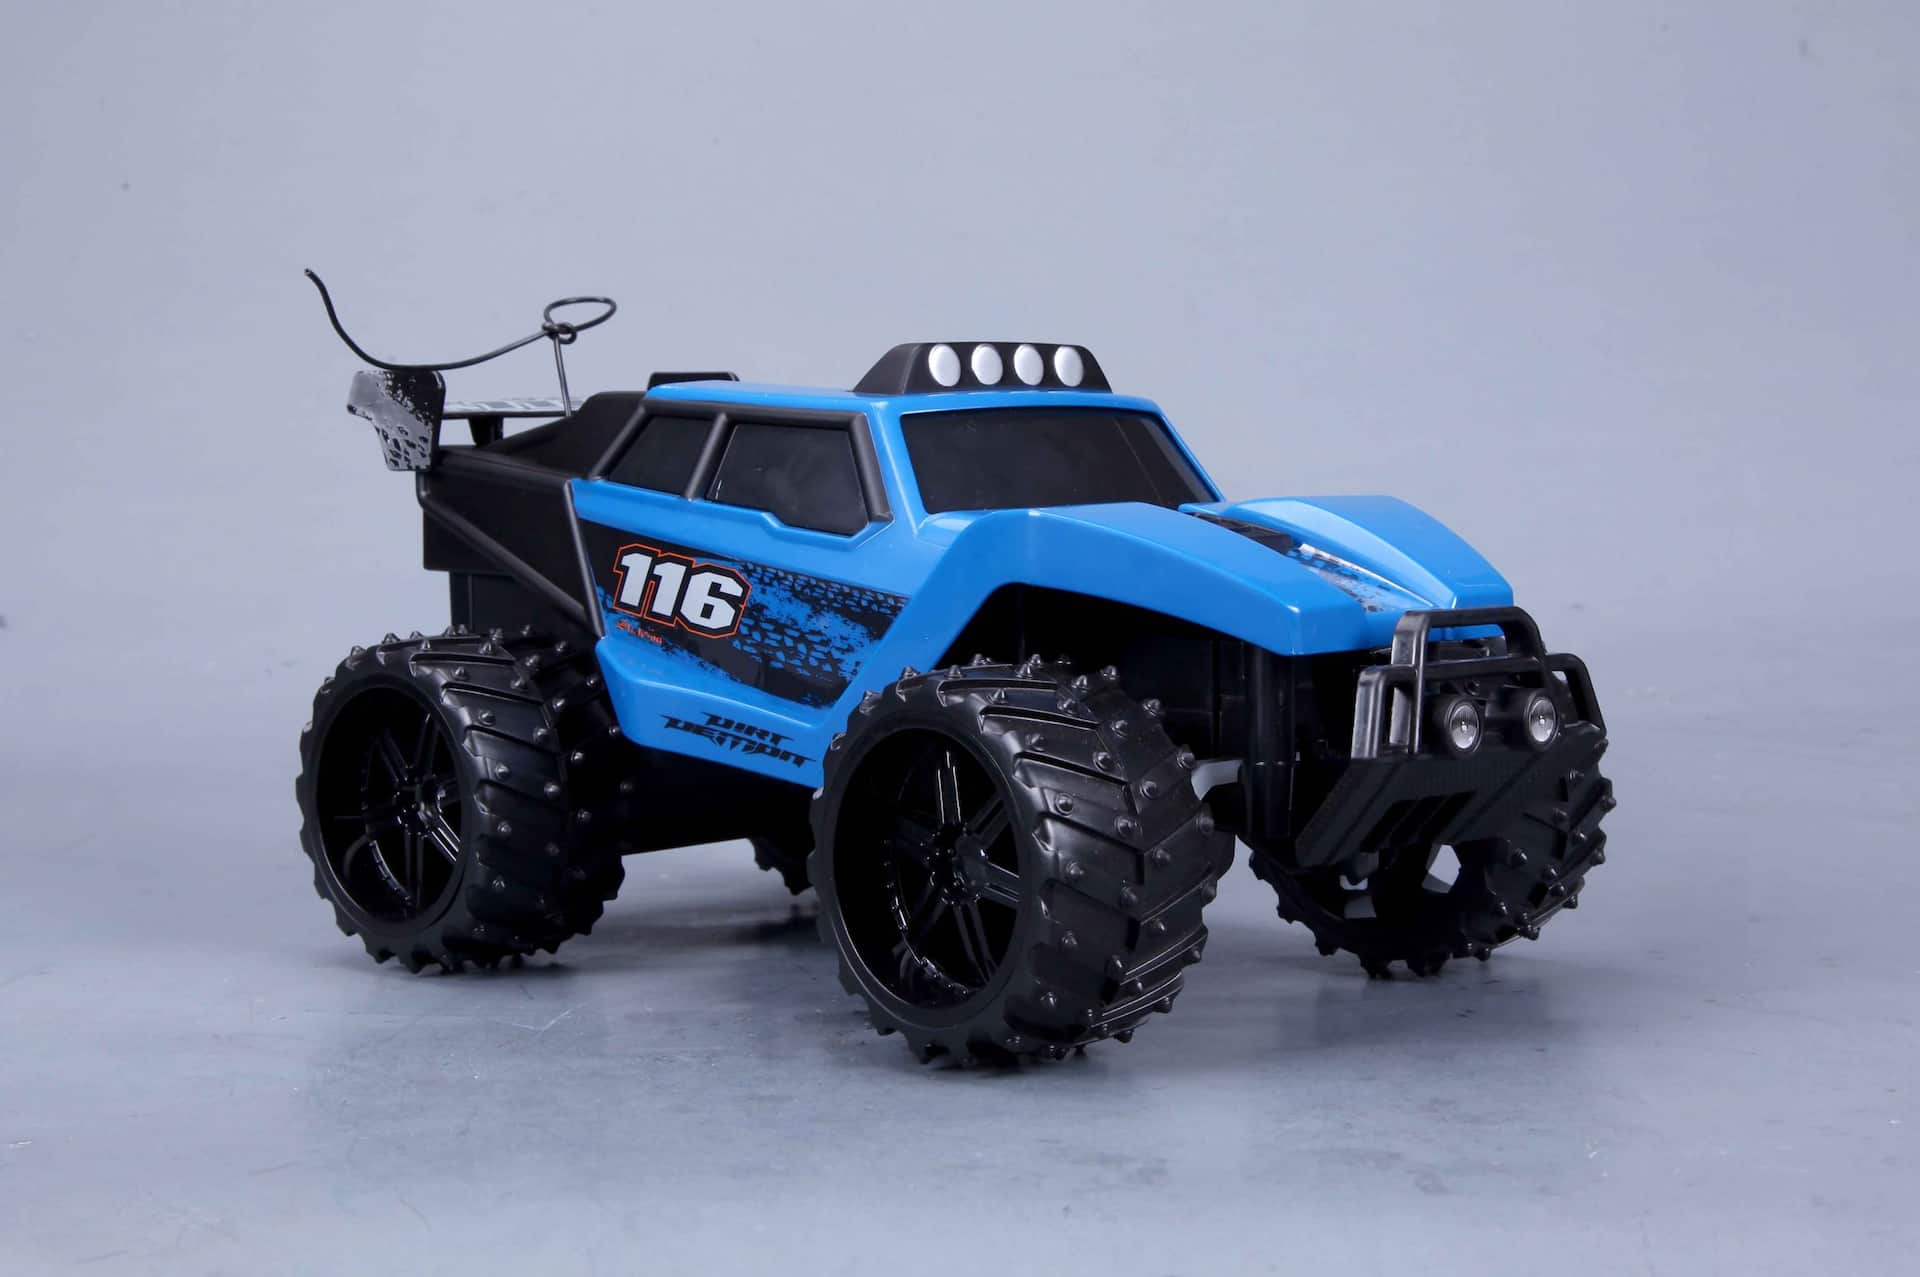 Offroad Series 1:16 Scale Remote Controlled Truck Vehicle Toy